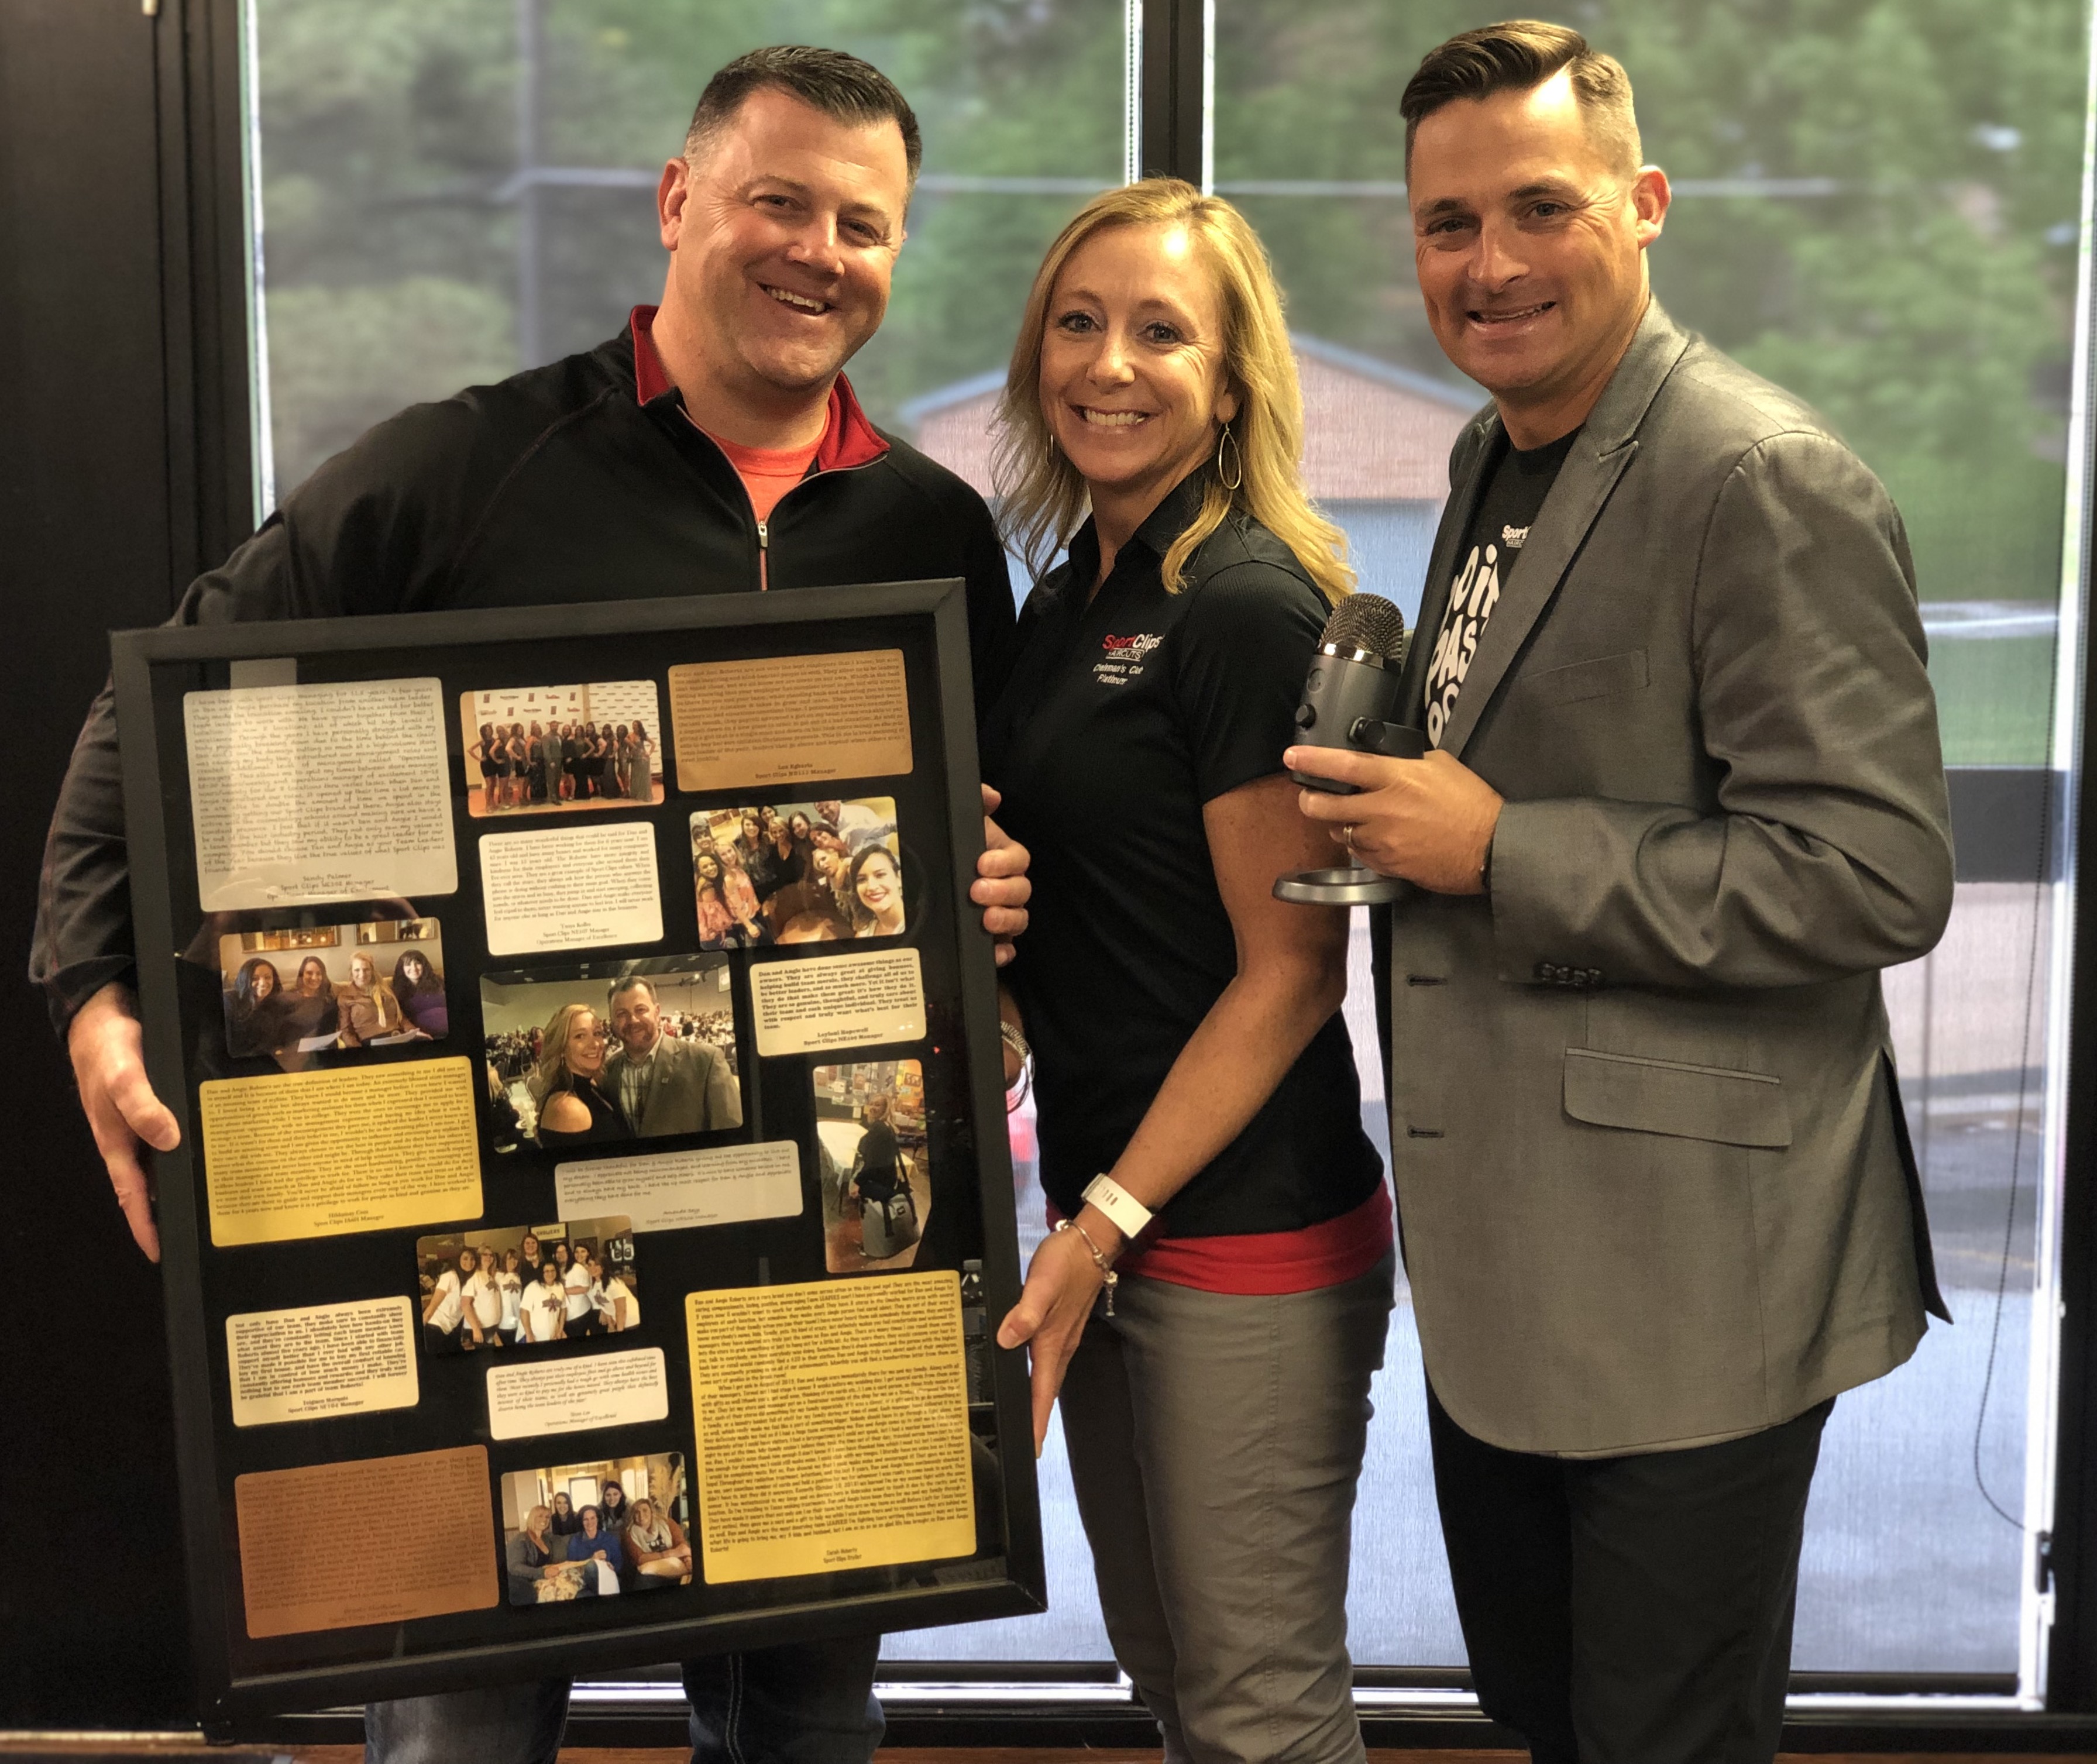 Chad Jordan with Dan and Angie Roberts holding a shadow box of photos